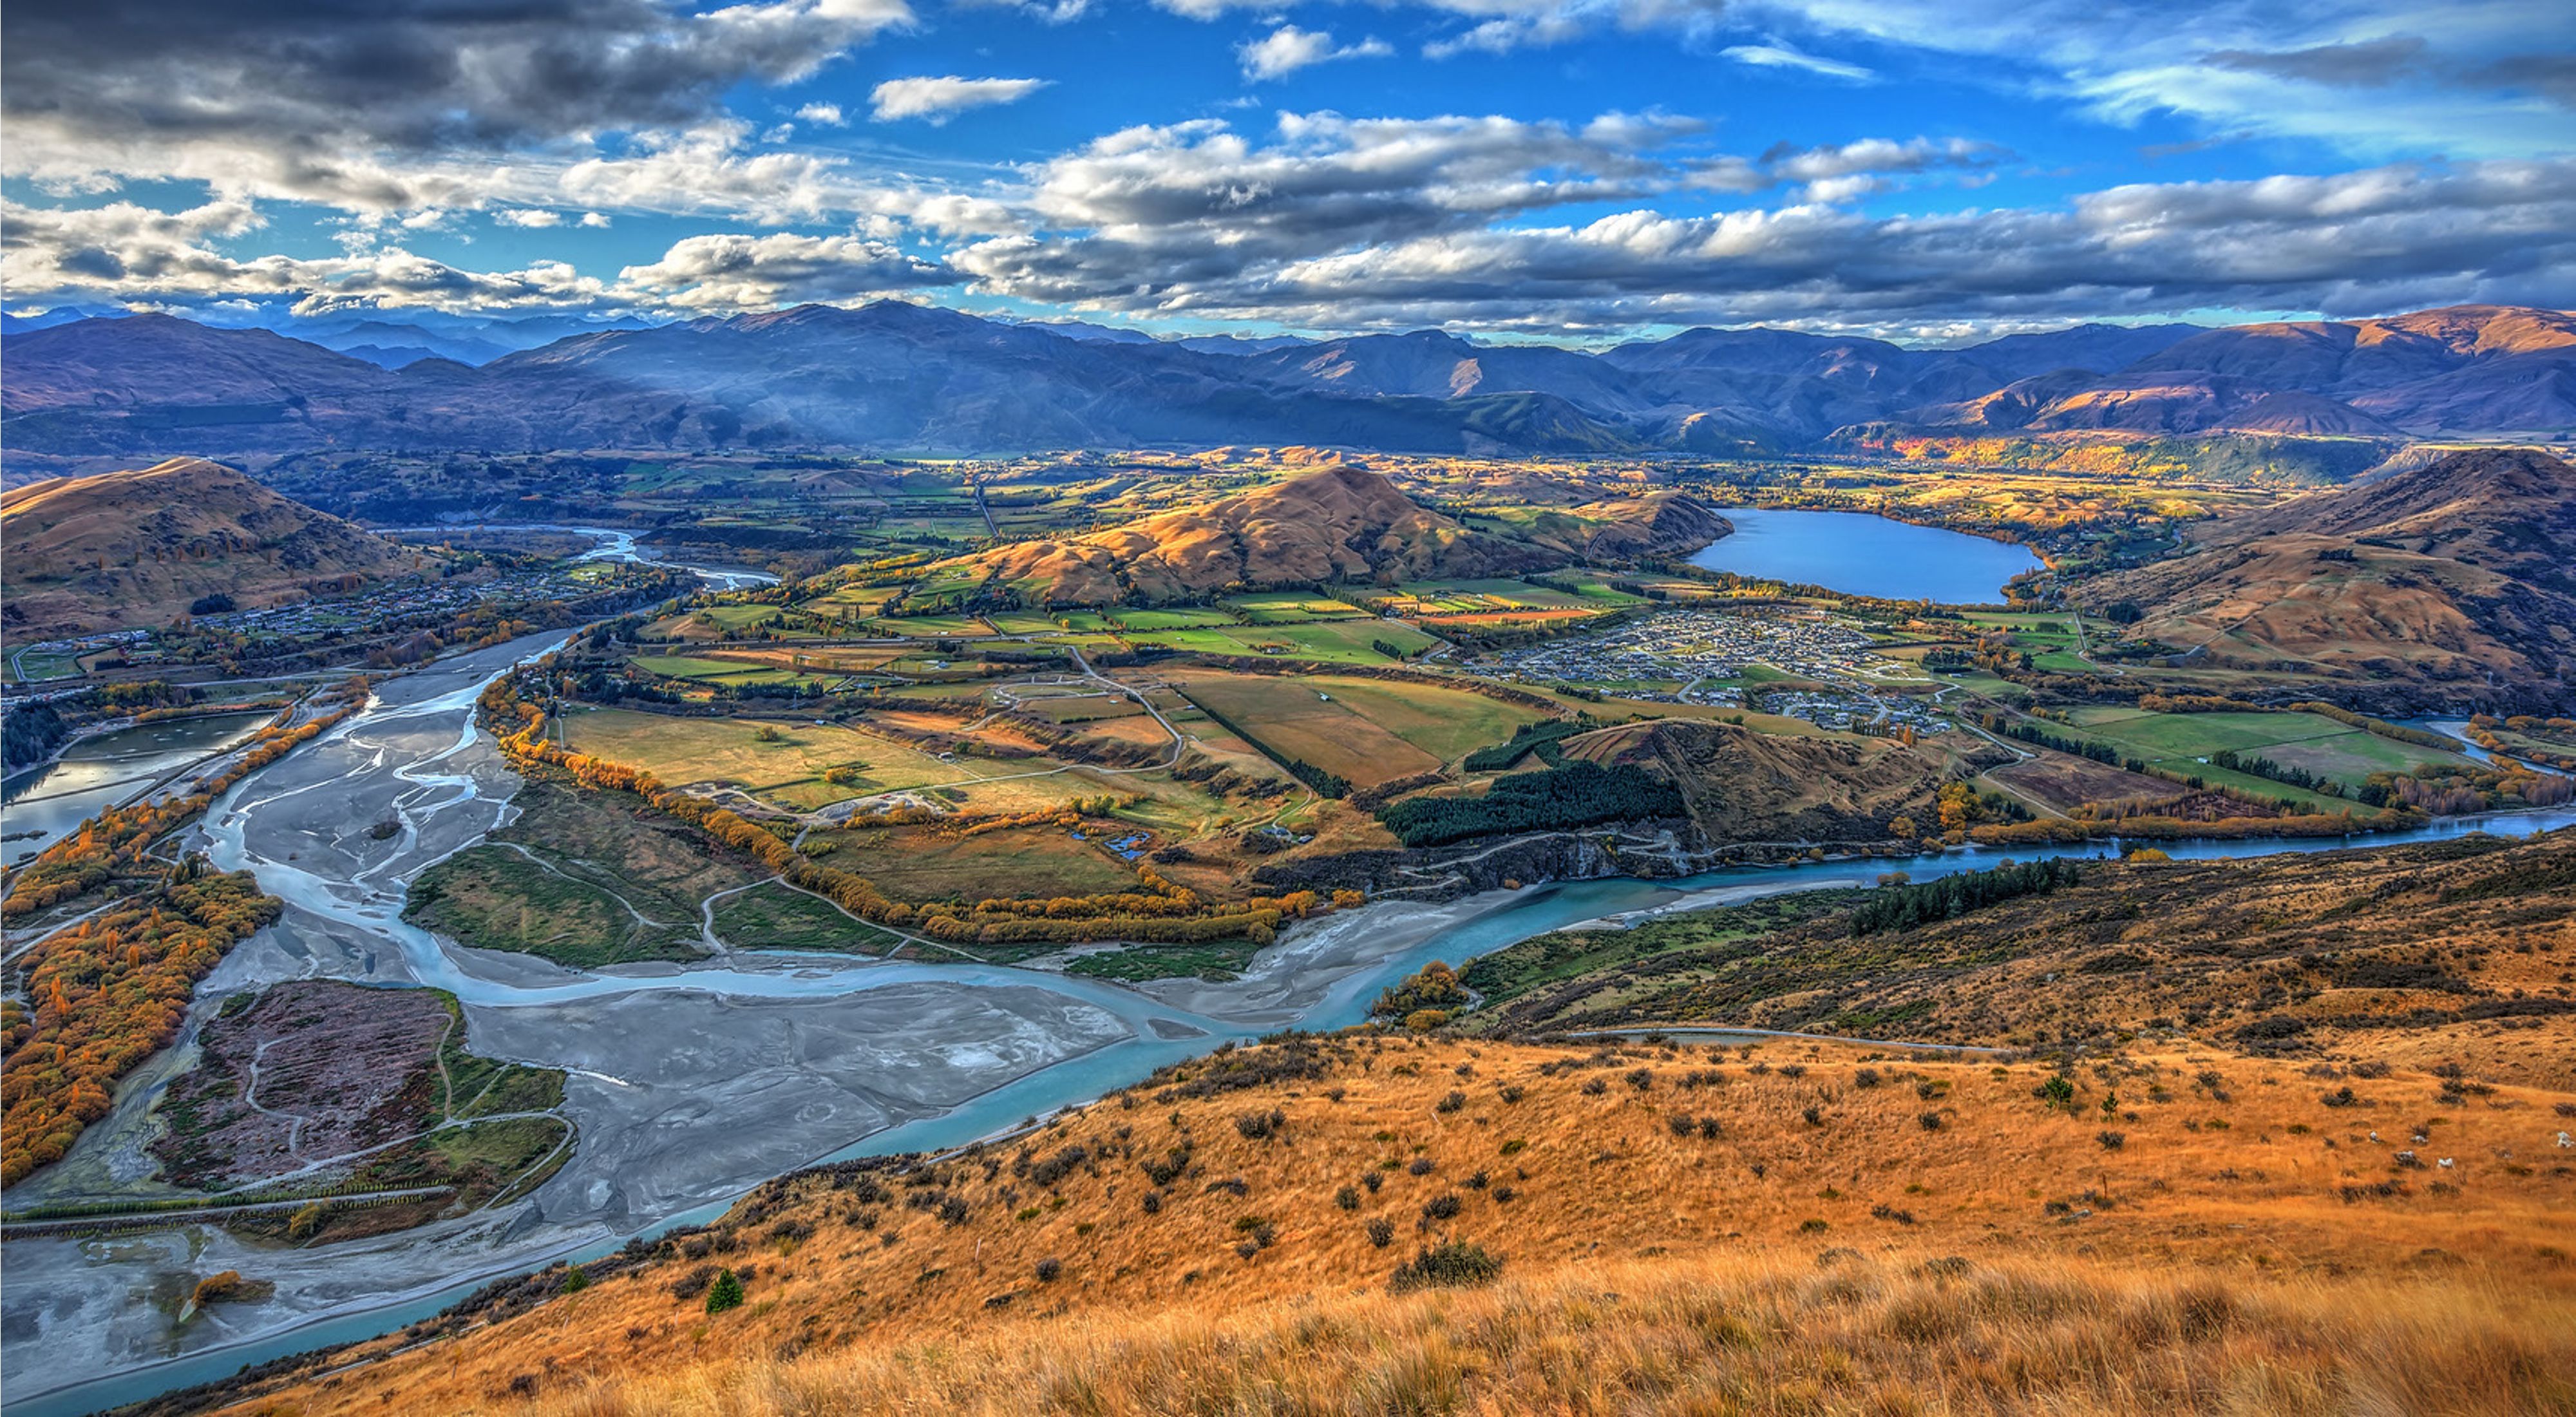 Aerial image of a wide expanse of golden mountains and snaking rivers under a blue sky filled with puffy white clouds in New Zealand.